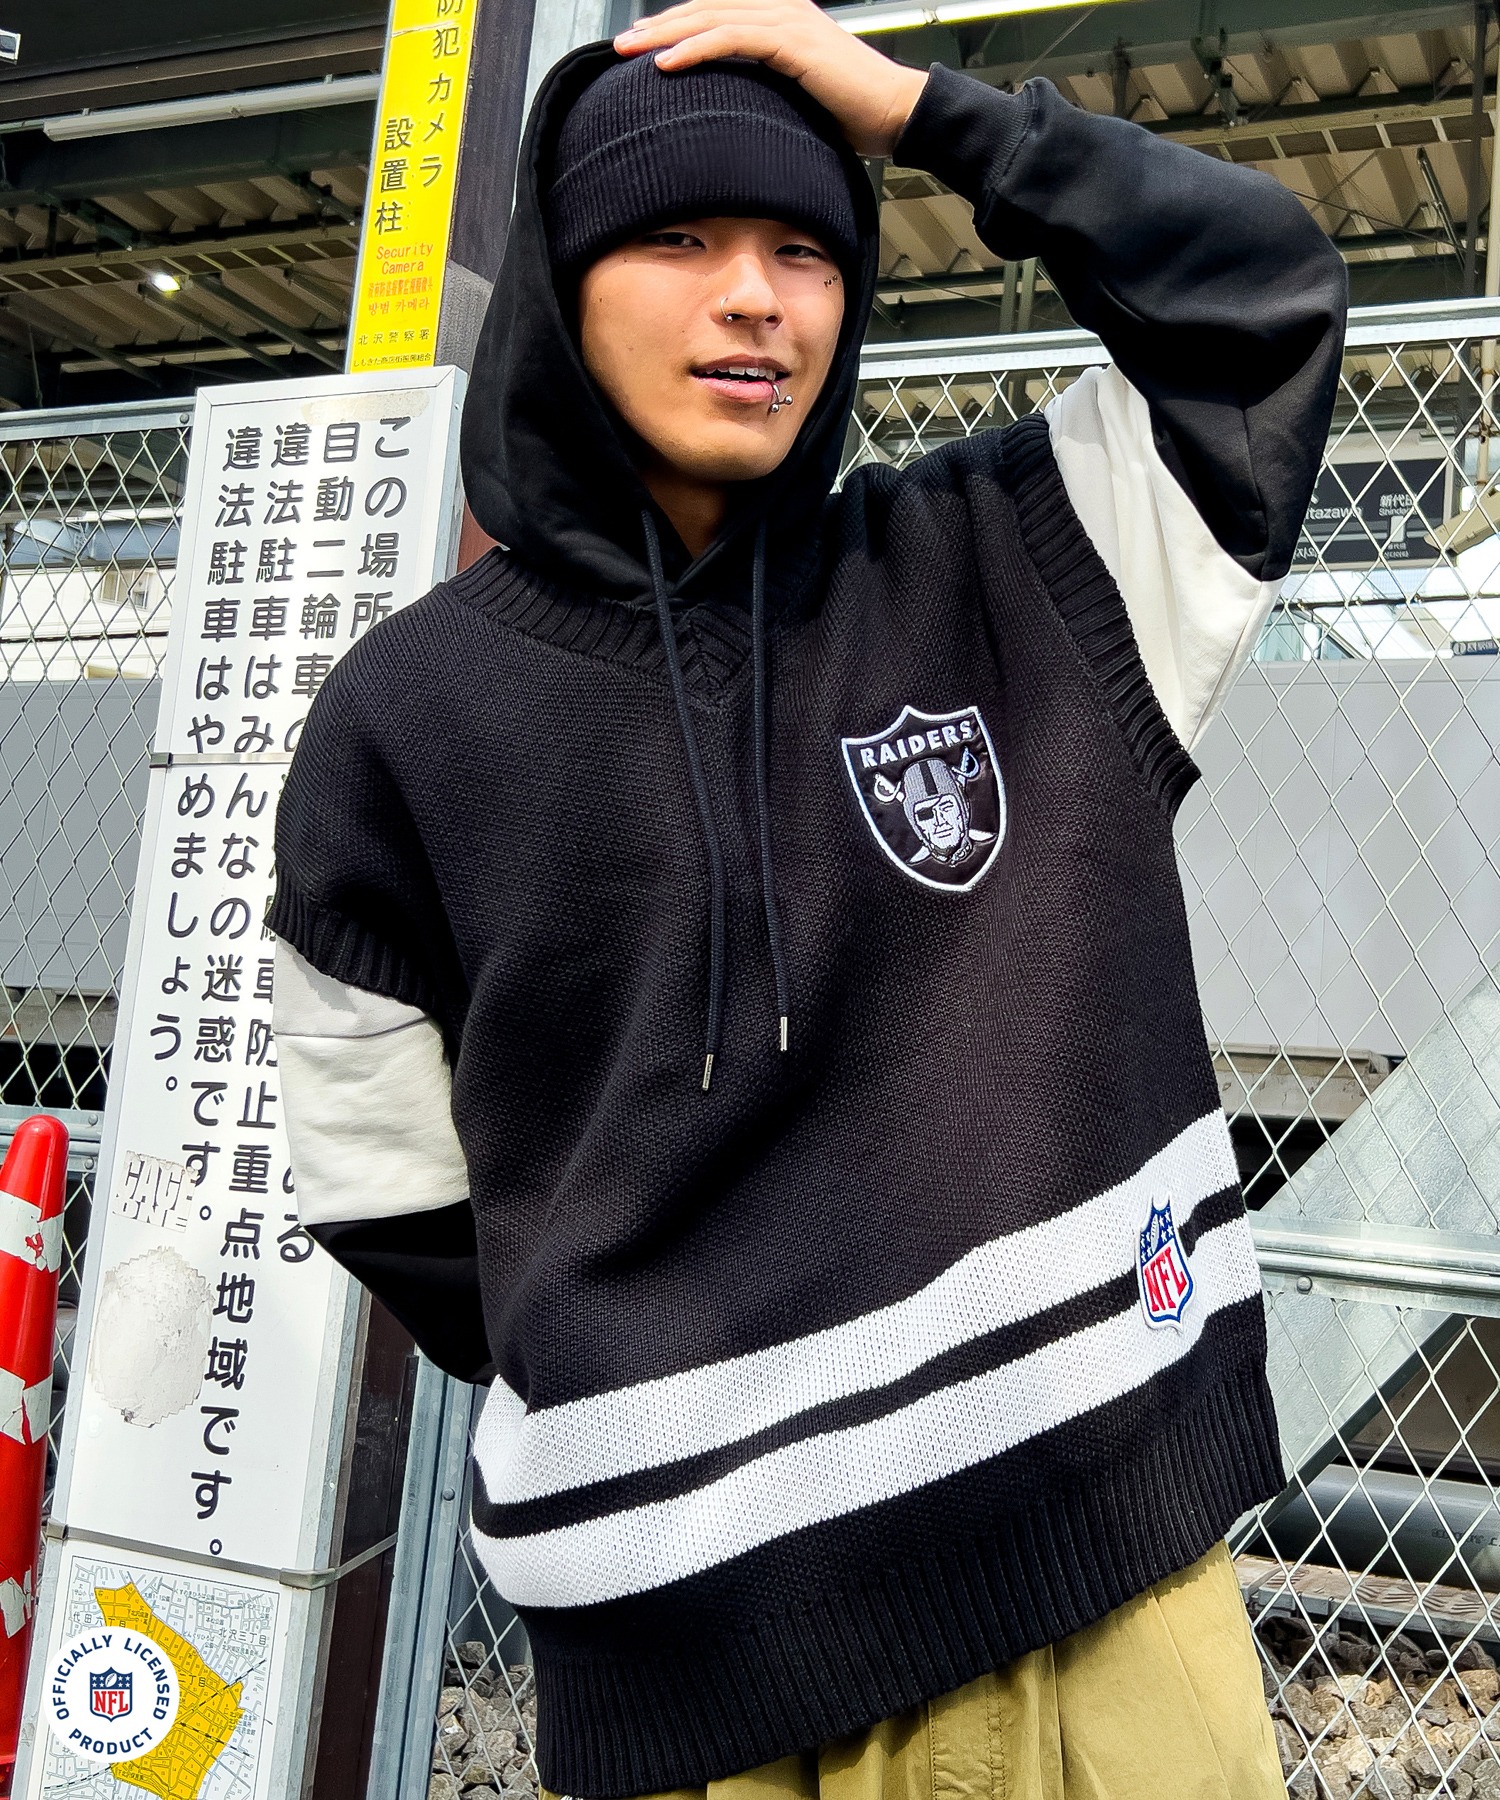 ［NFL×A'gem KNITTED VEST］アップリケ刺繍ニットベスト